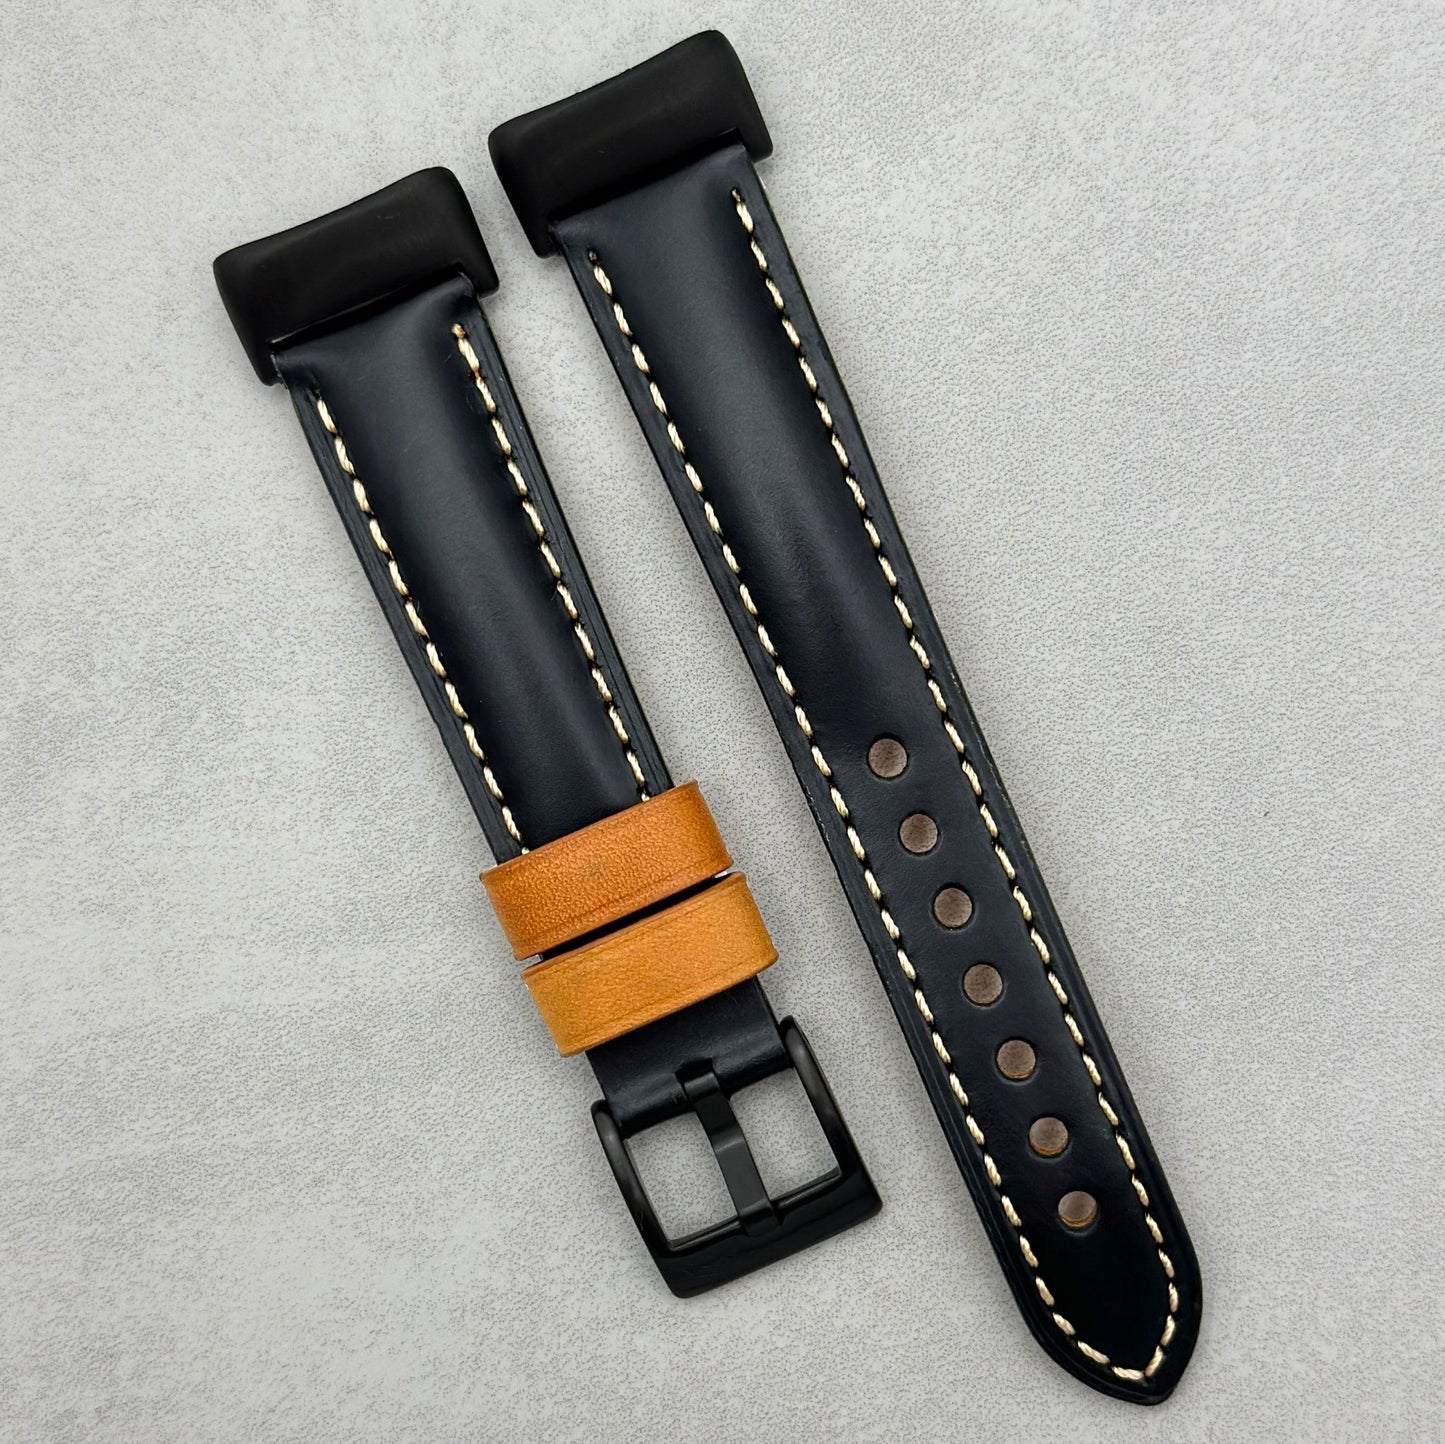 Oxford jet black calf skin Fitbit Charge watch strap. Fitbit Charge 1, 2, 3, 4, 5, 6. Full Grain Leather. Watch And Strap.